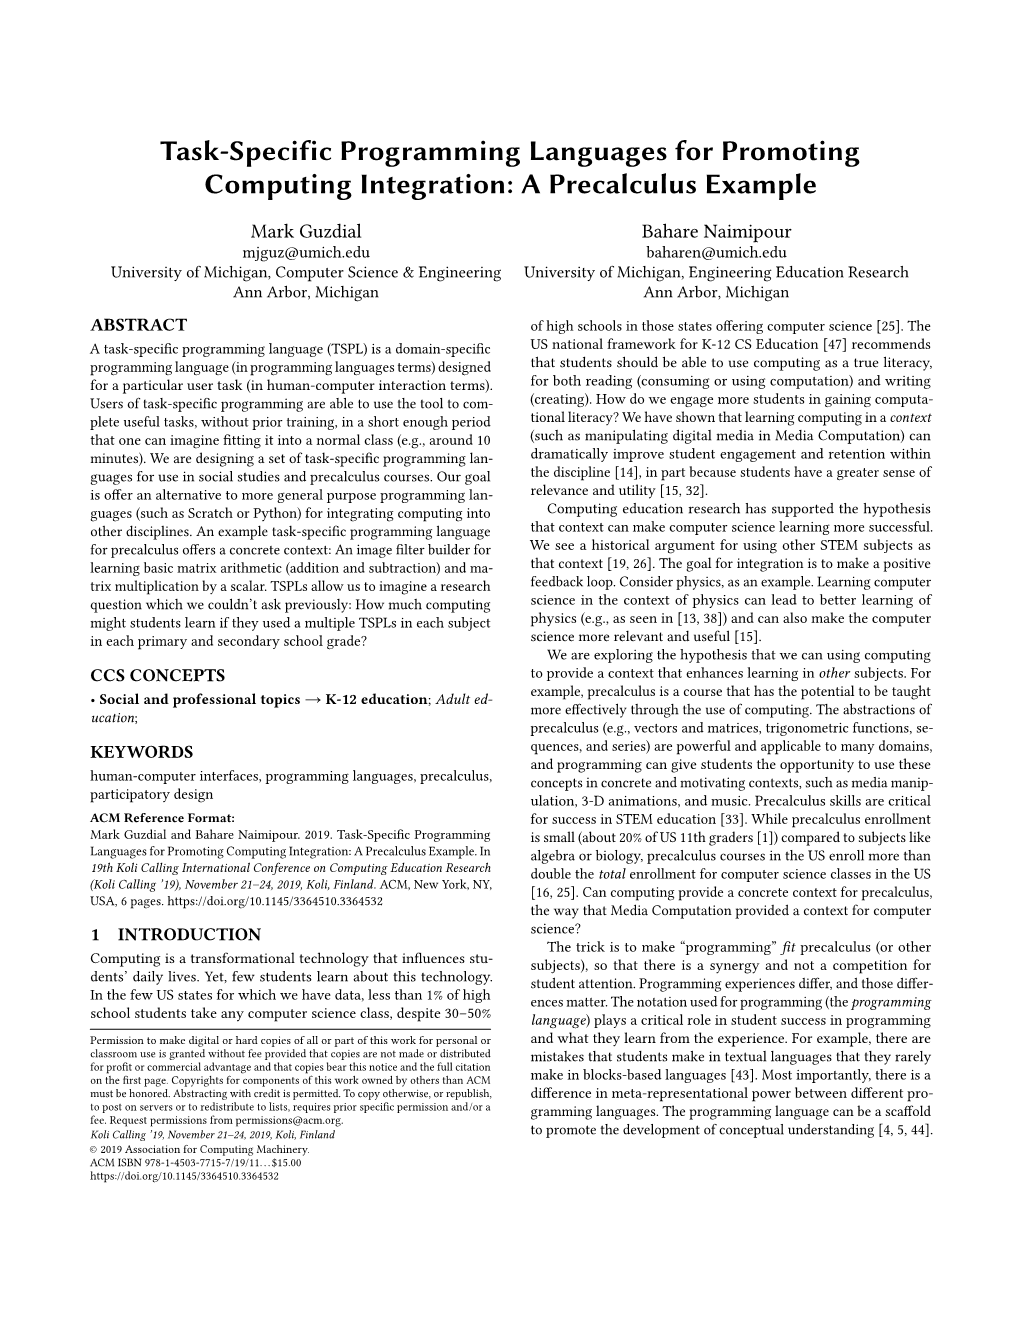 Task-Specific Programming Languages for Promoting Computing Integration: a Precalculus Example